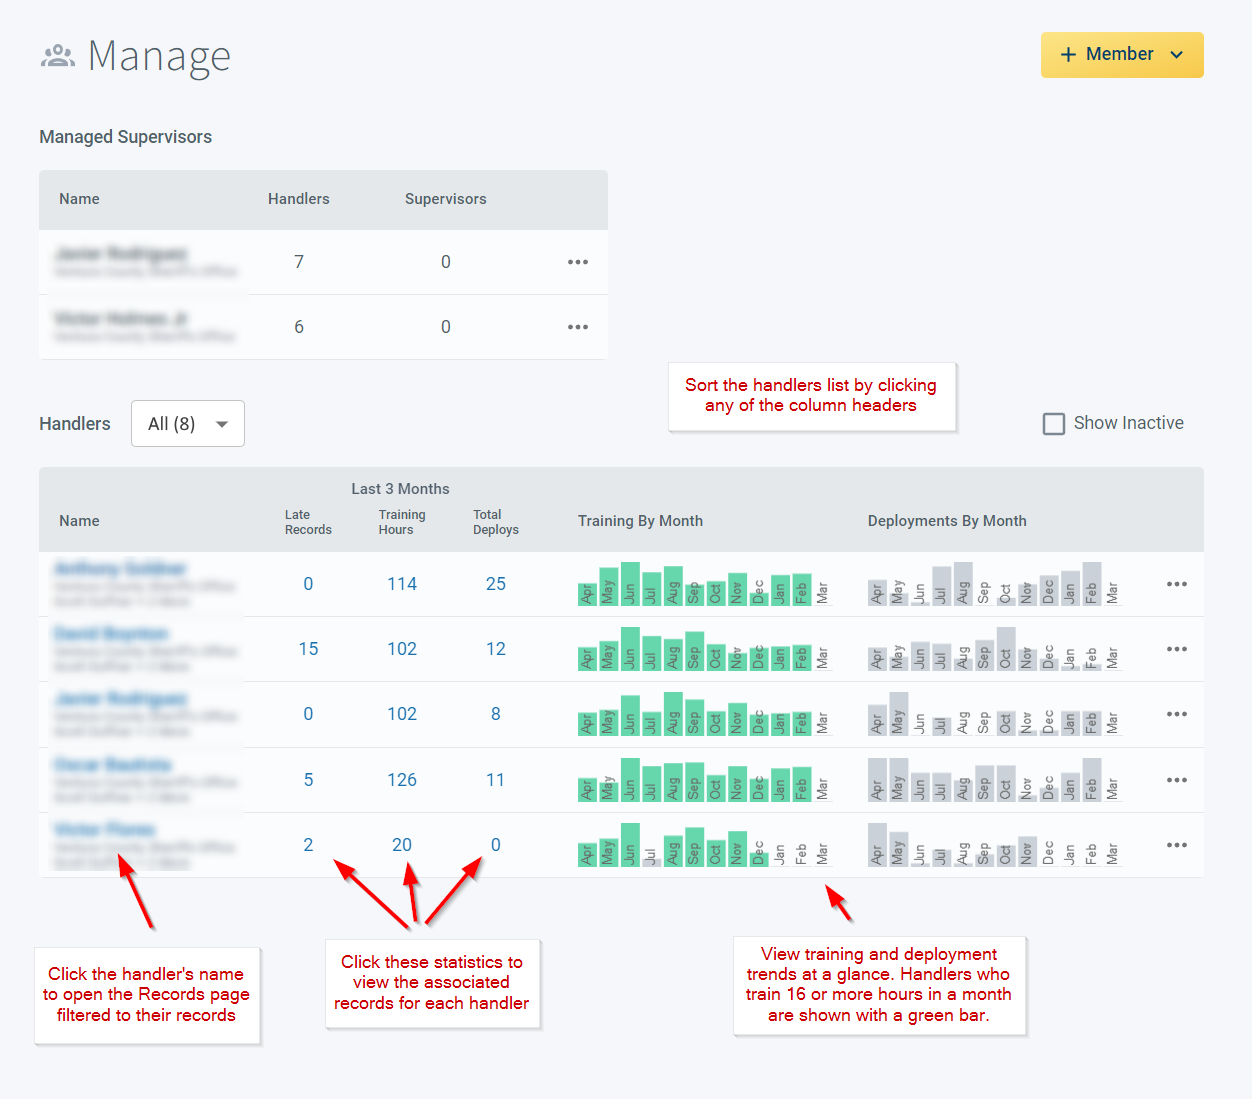 K9 supervisors can view handler summary data in the new Manage page